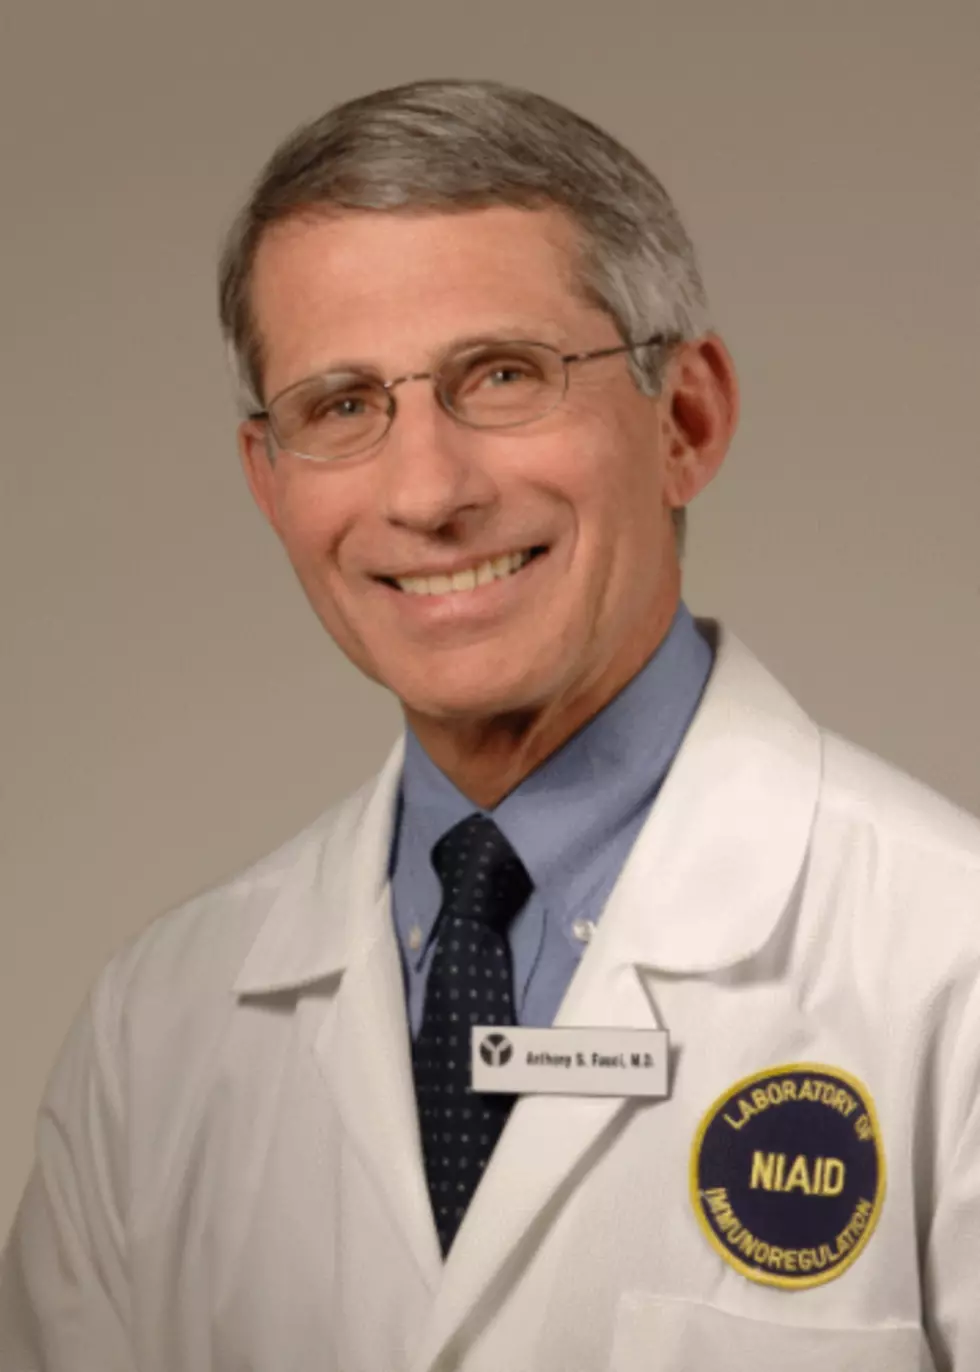 ‘As good as it gets,” Fauci says of Moderna vaccine’s reported 94.5% effectiveness